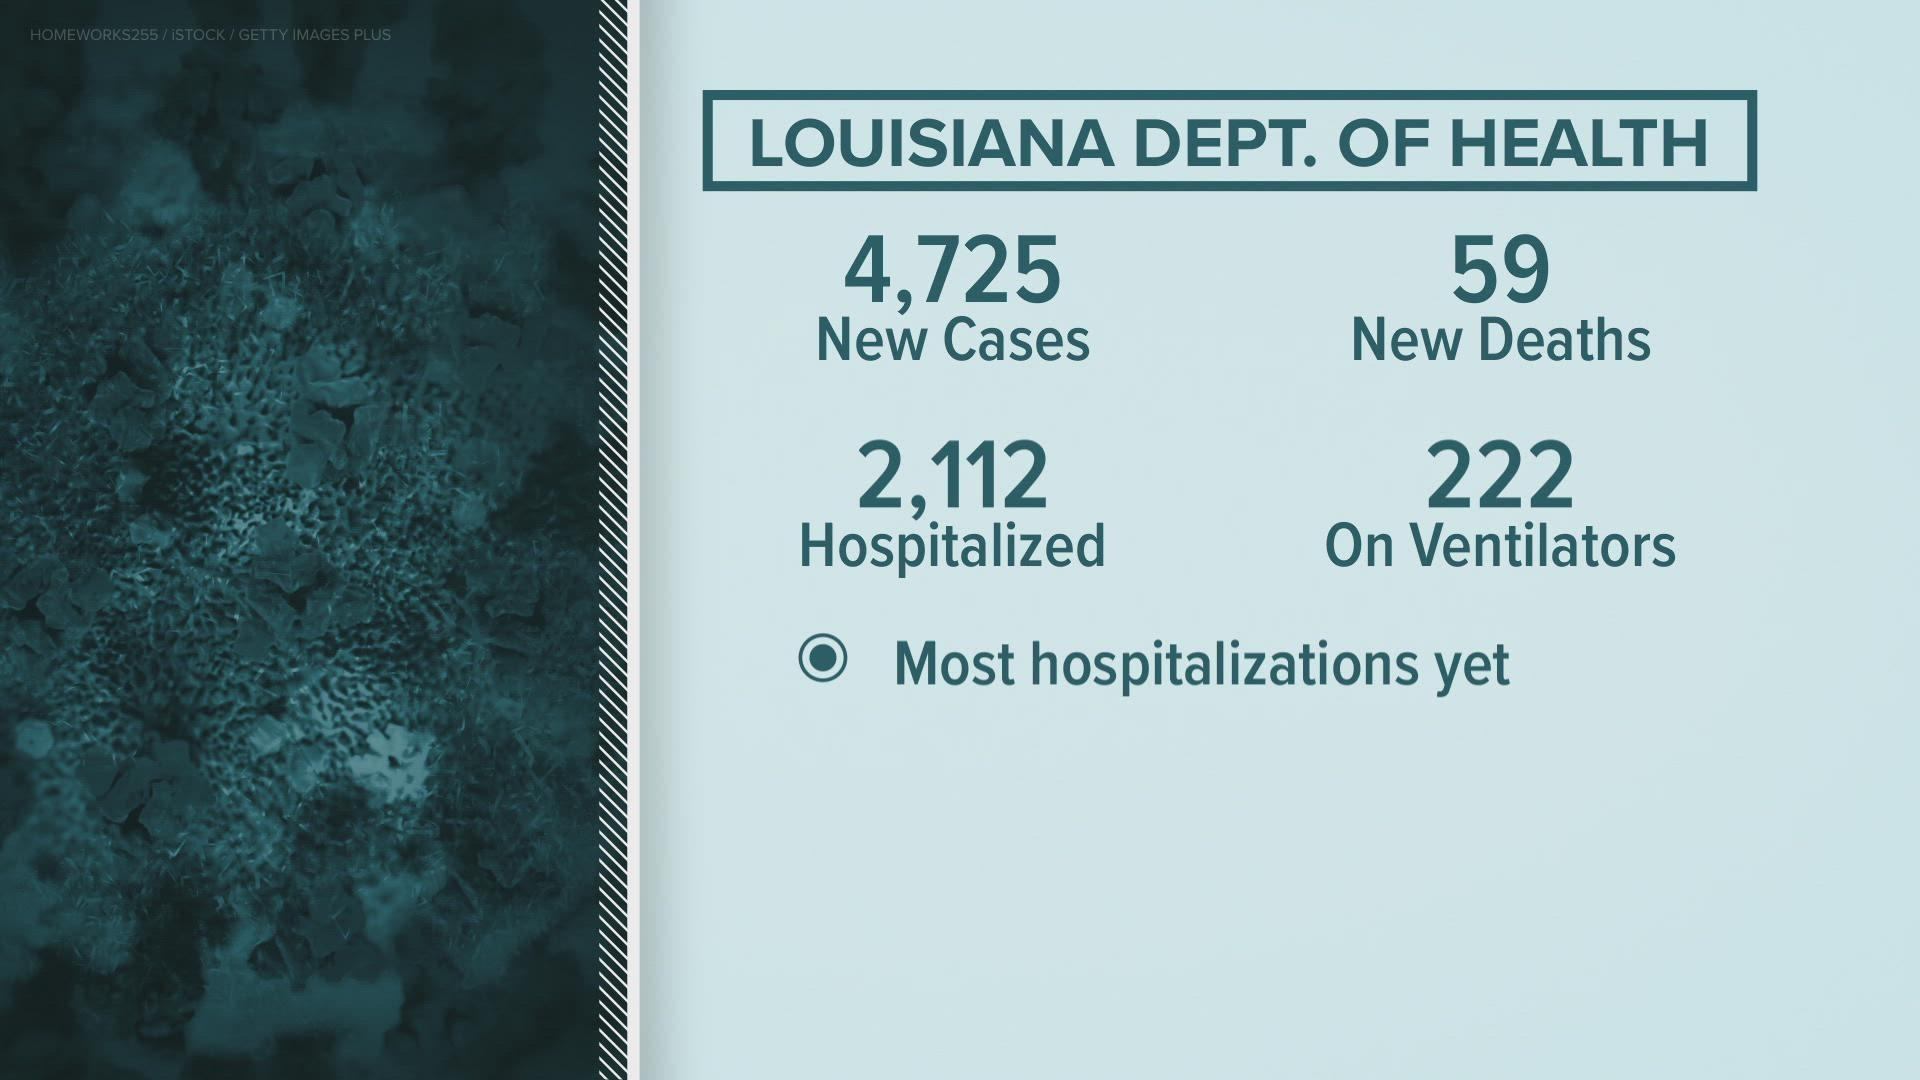 The massive number of hospitalizations is one of the starkest reminders that Louisiana is in the fourth wave of the coronavirus pandemic.